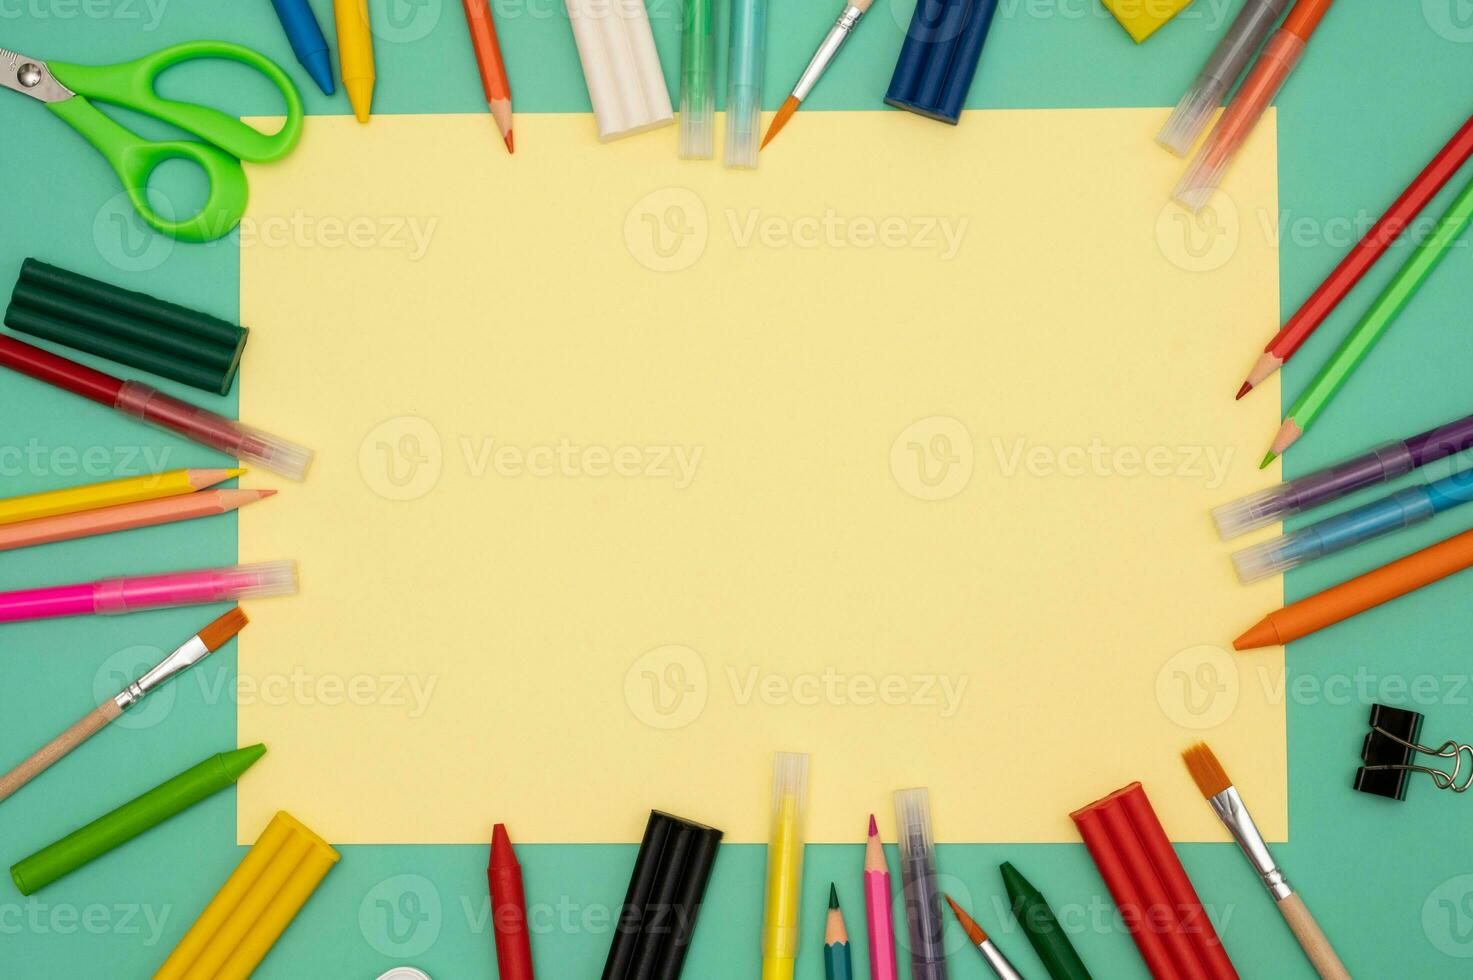 Back to school soon. buying stationery, flatley, a place to copy your text or advertising on a piece of paper. Bright background. photo